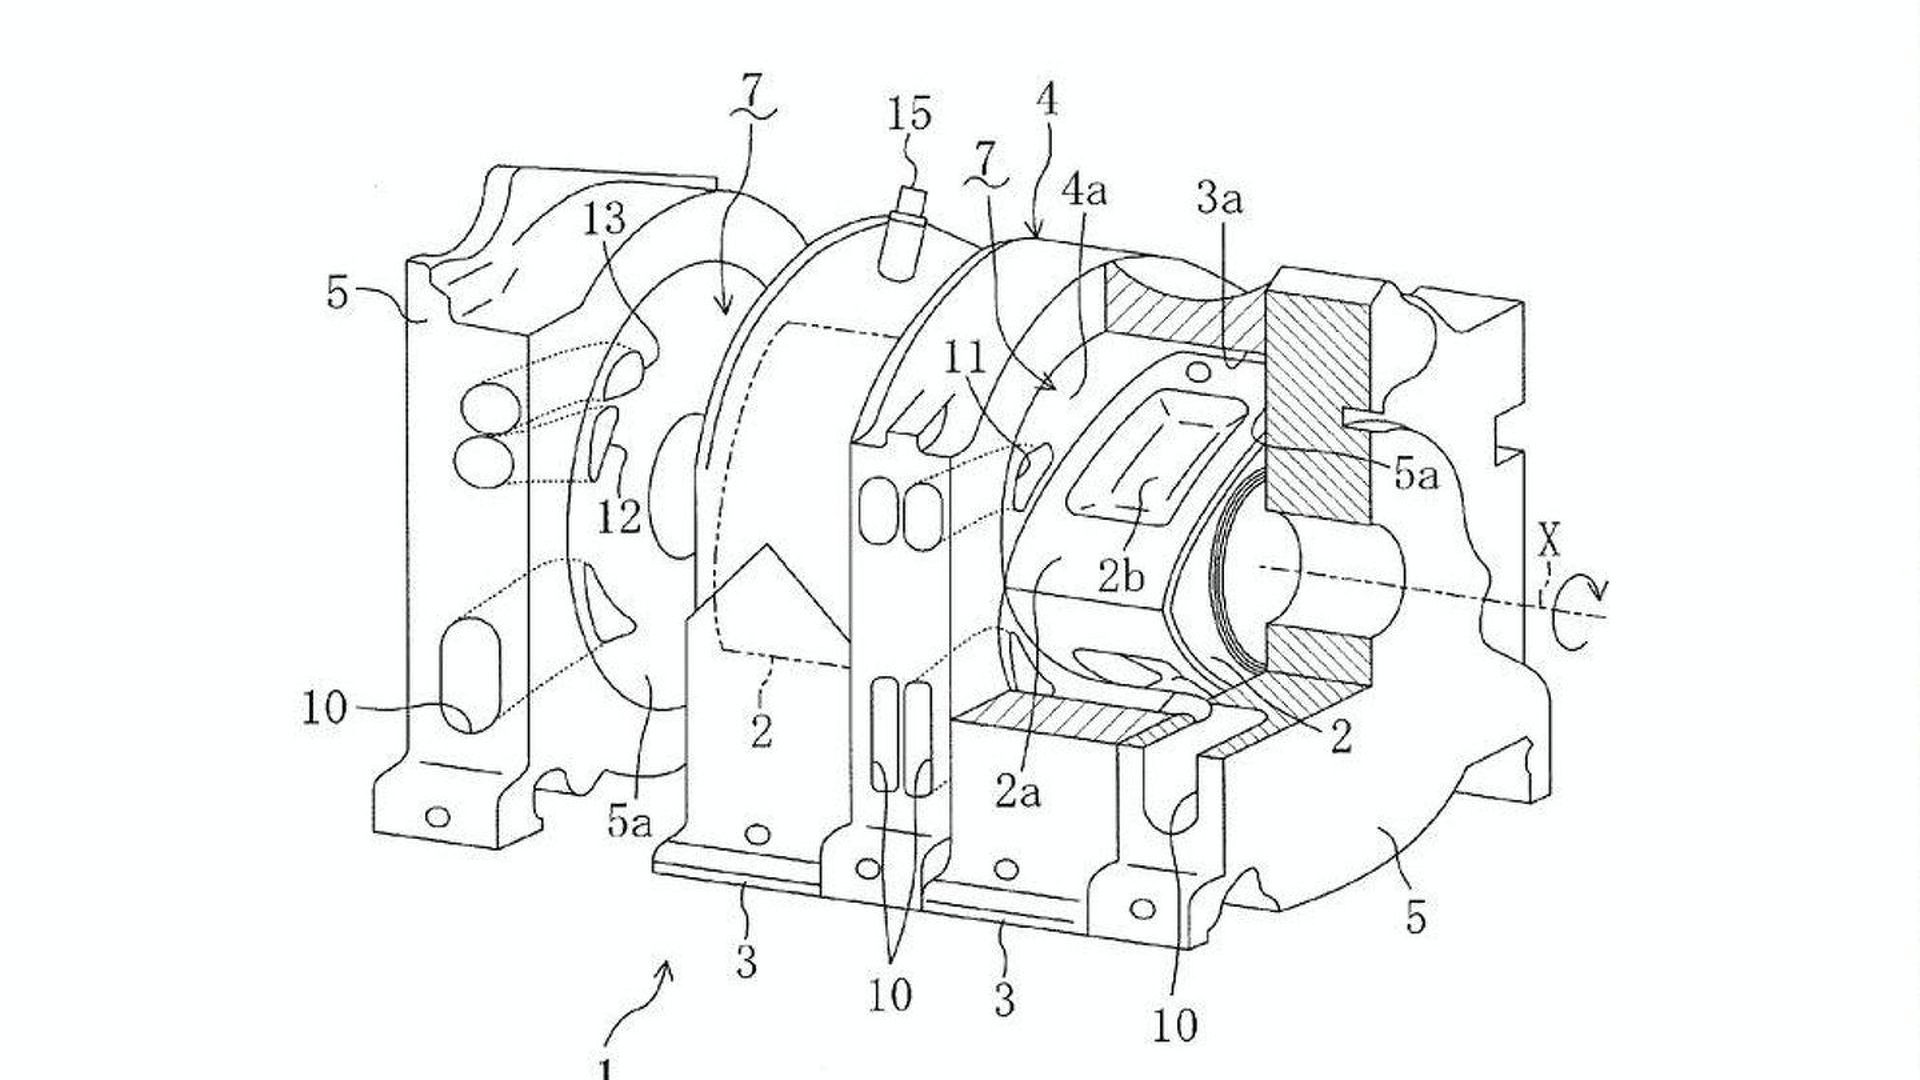 Wankel Rotary Engine Diagram Patent Diagrams Reveal Direct Injection Mazda Renesis Rotary Engine Of Wankel Rotary Engine Diagram